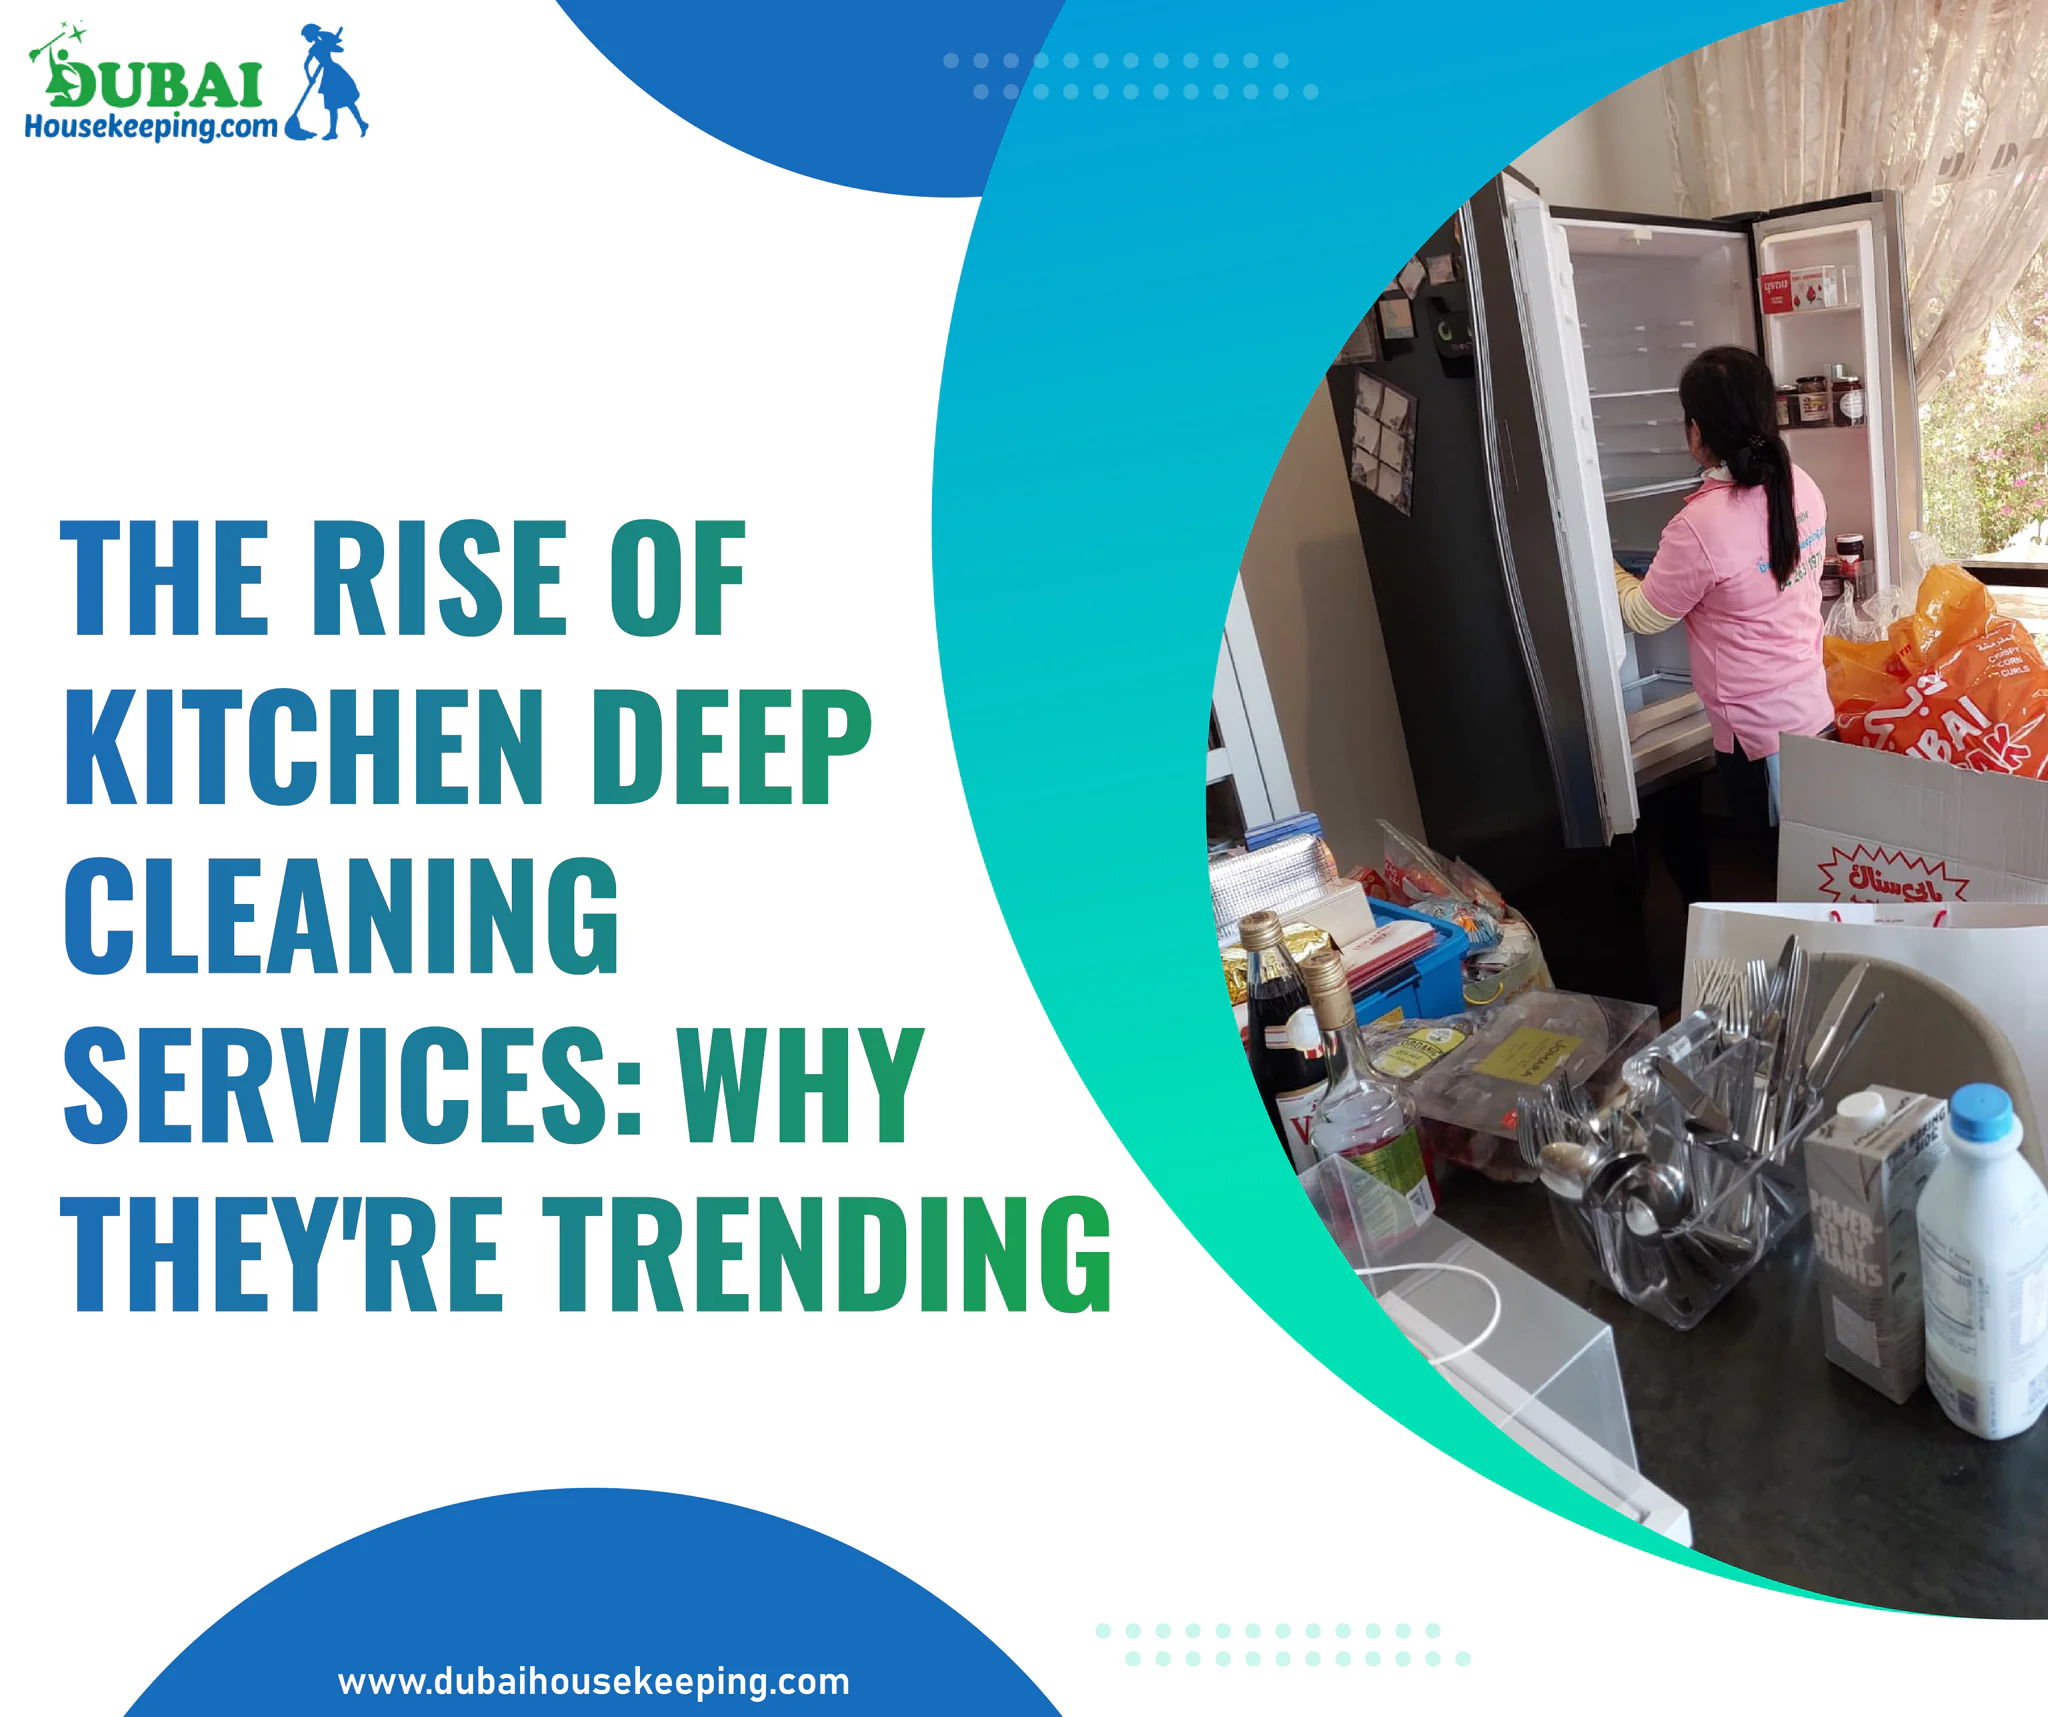 The Rise of Kitchen Deep Cleaning Services: Why They’re Trending